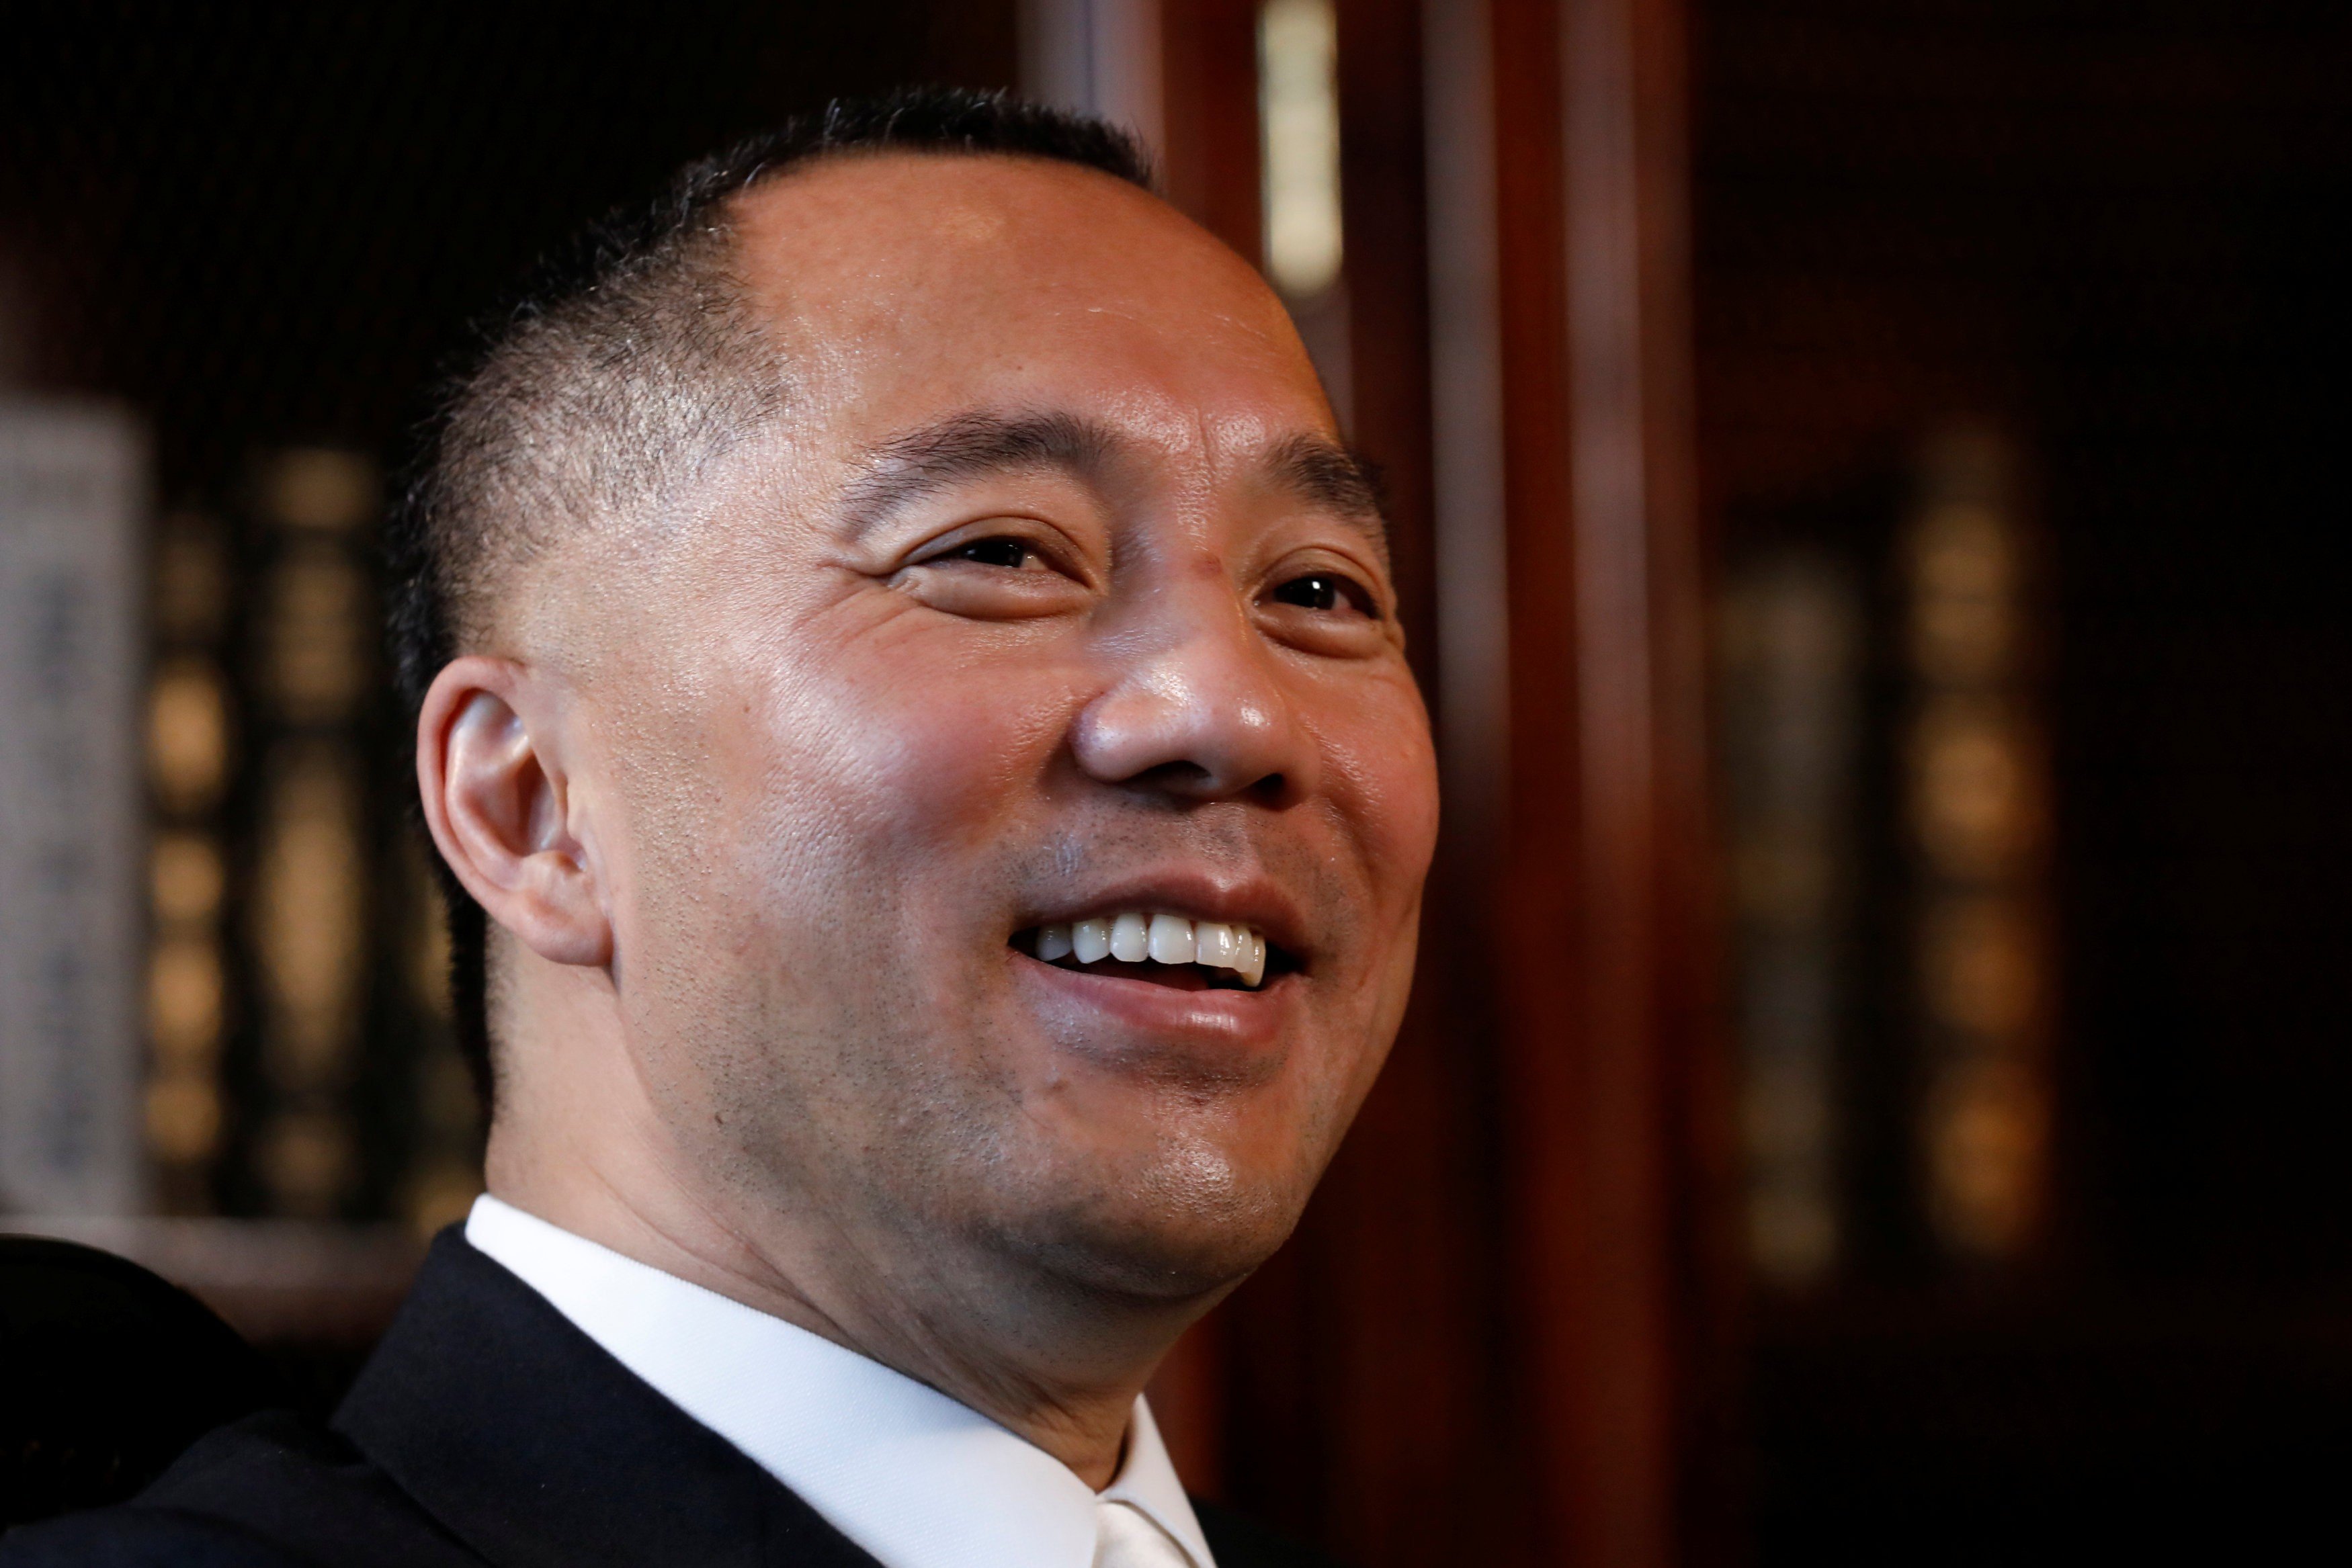 Guo Wengui speaks during an interview in New York City on April 30, 2017. Photo: Reuters